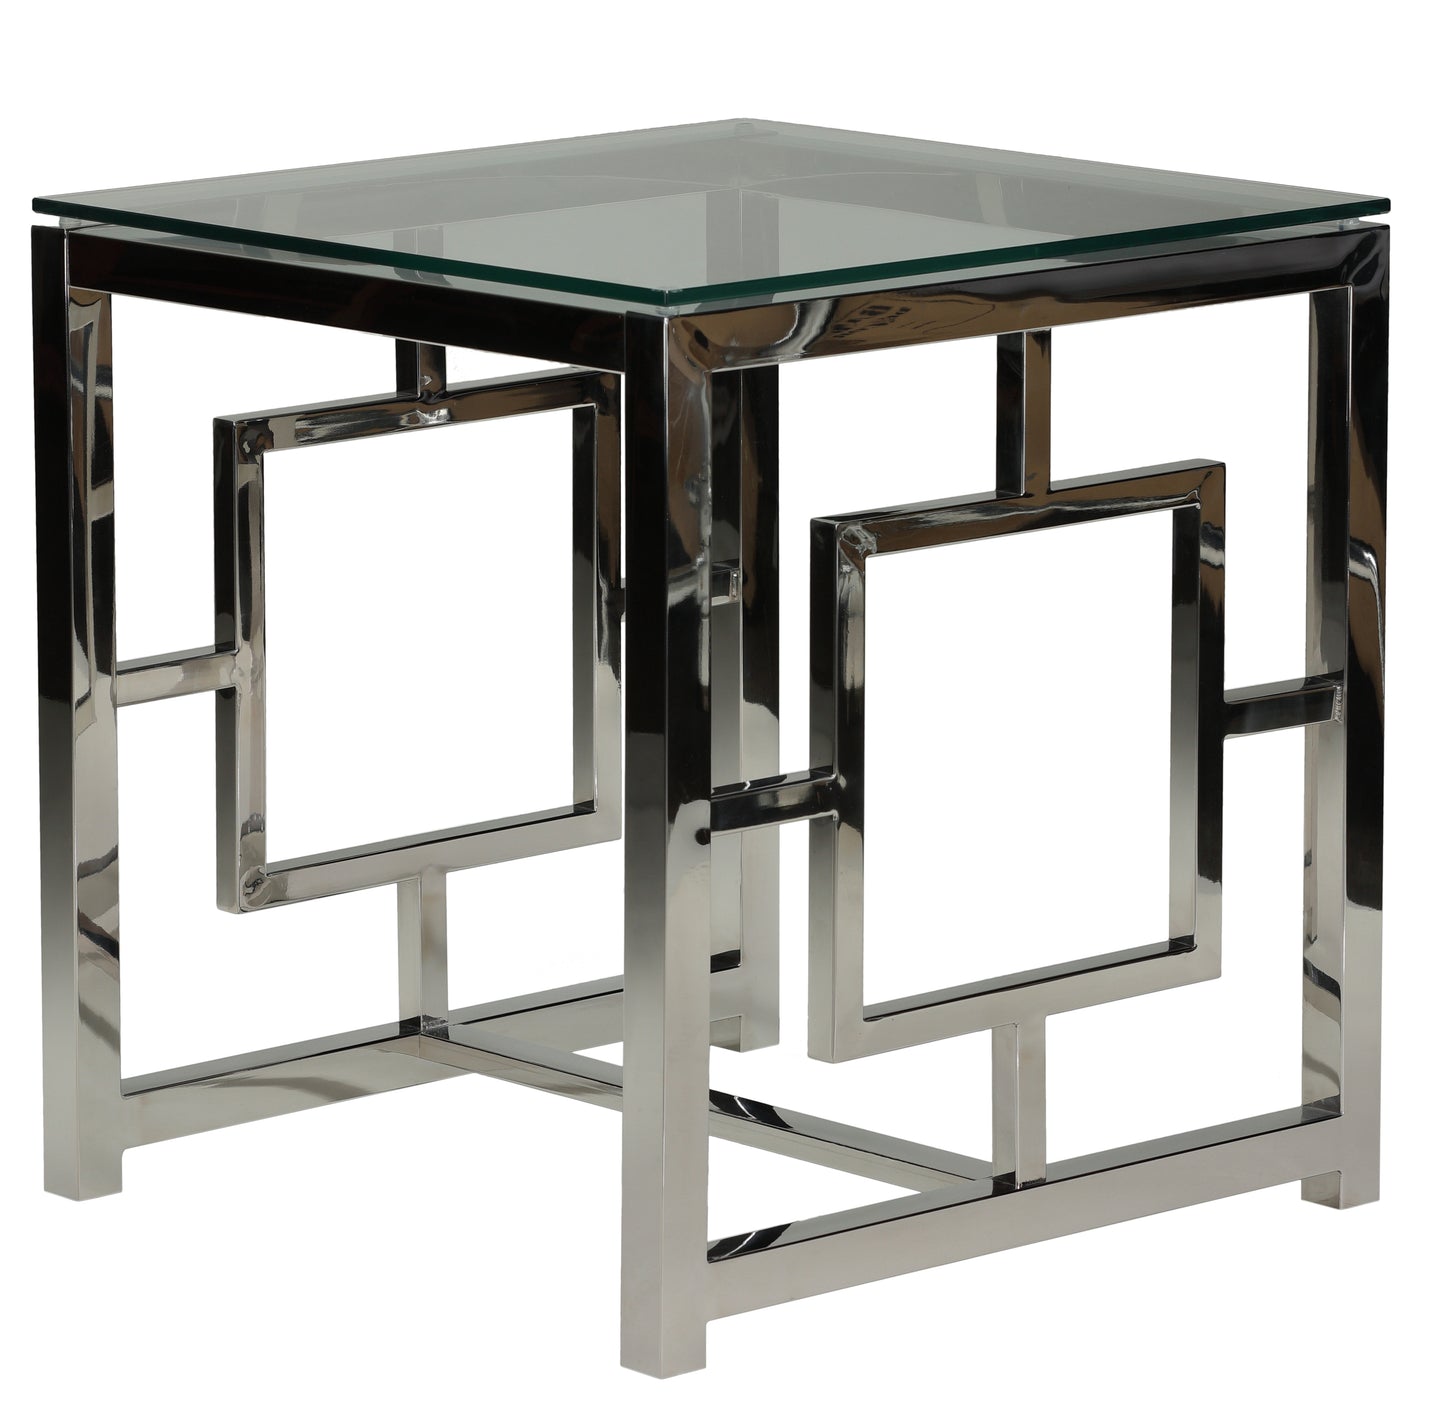 Cortesi Home Kamdyn Square Contemporary End Table, Metal & Glass